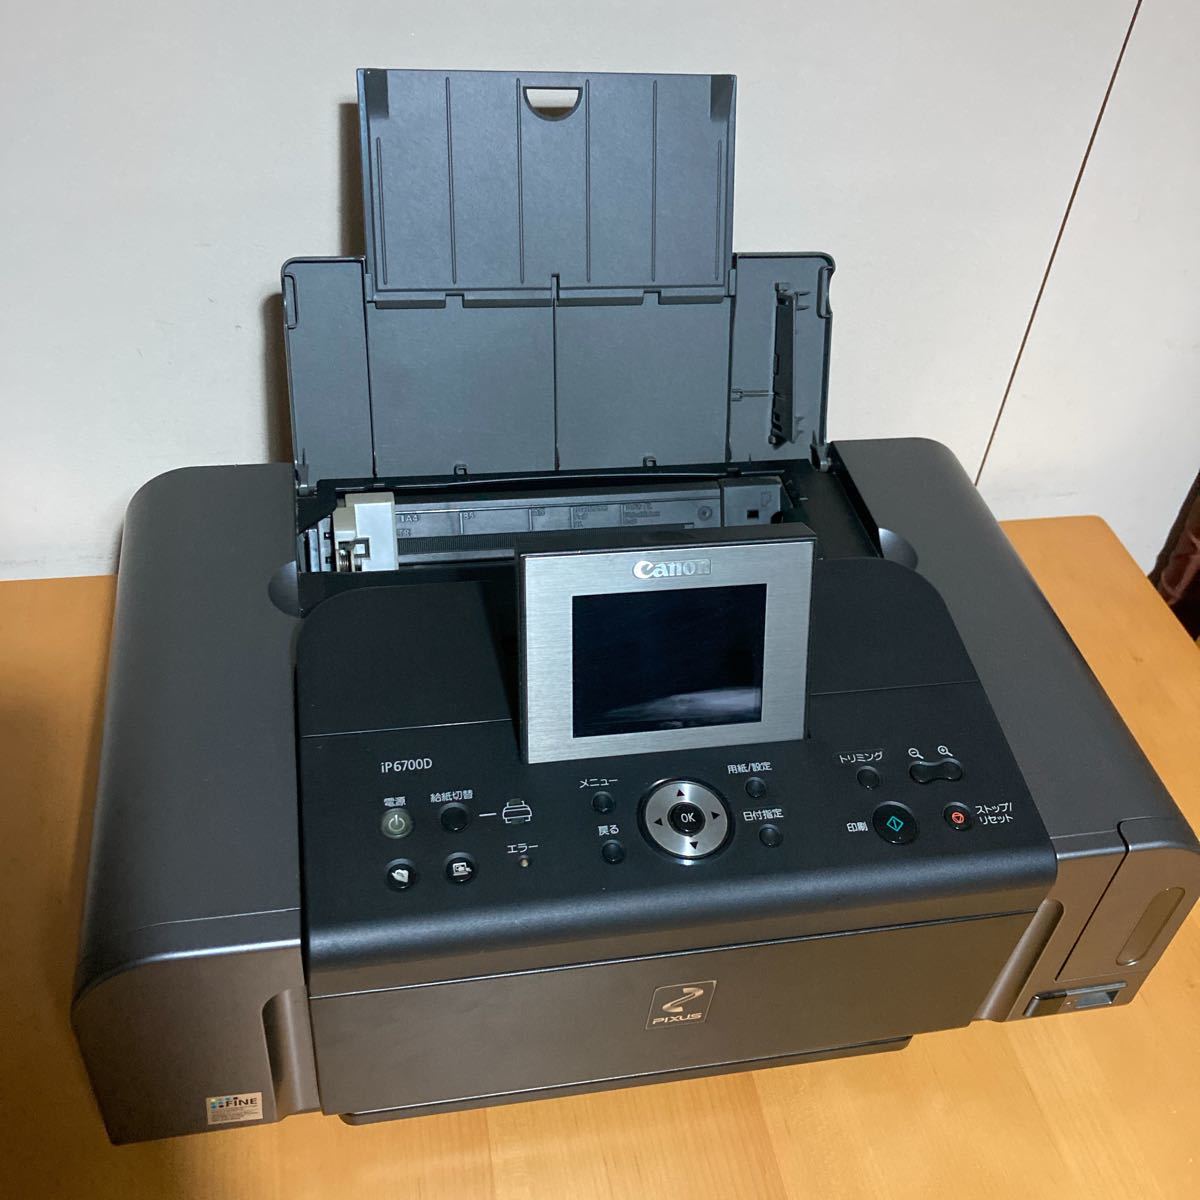 does canon ip6700d printer able to do wirless printing